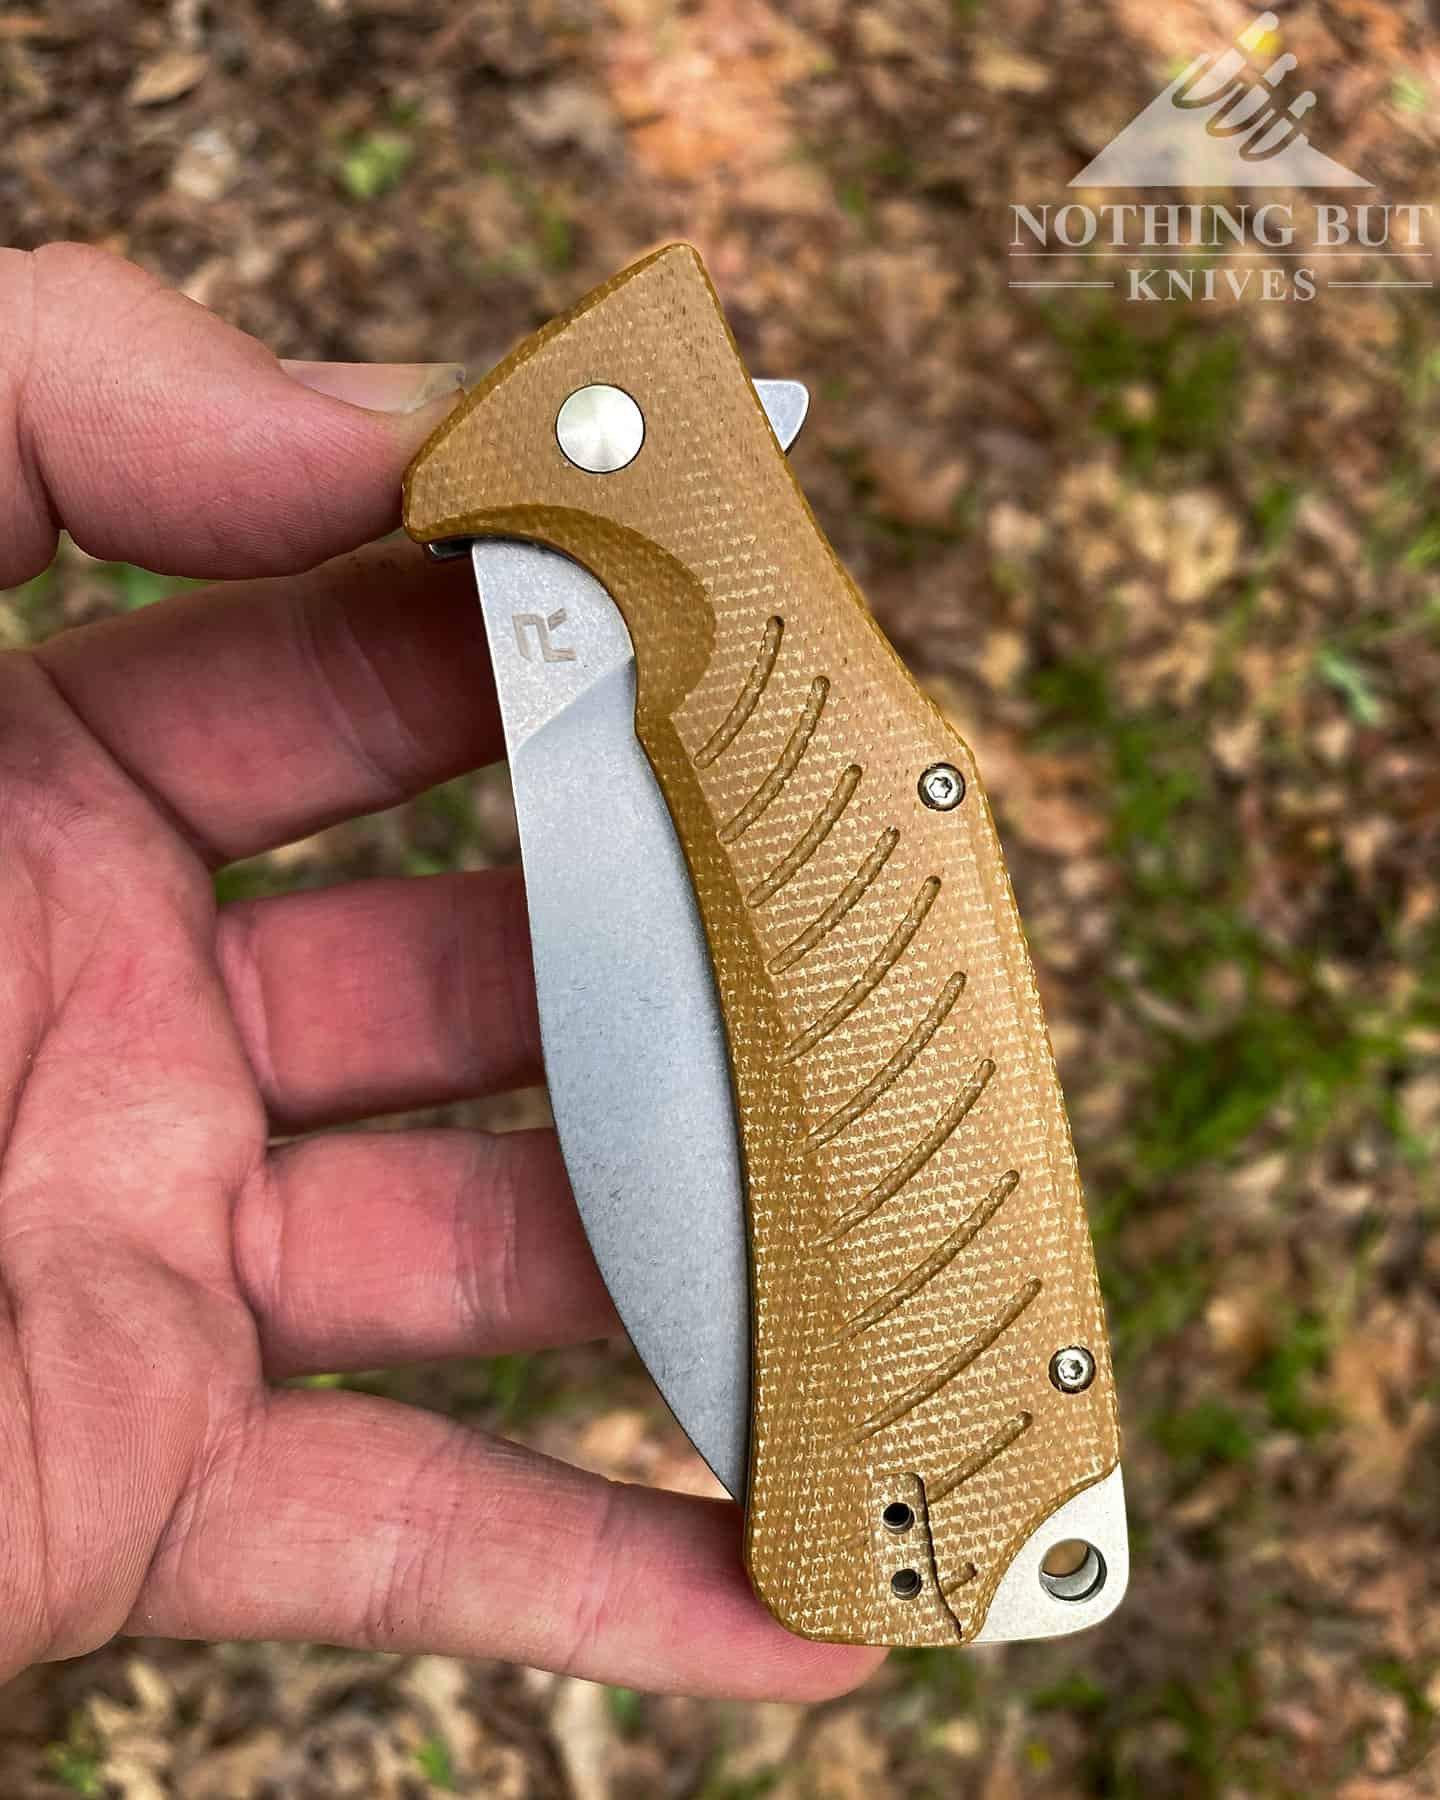 The G10 handle scales on the Ness are a nice touch. 